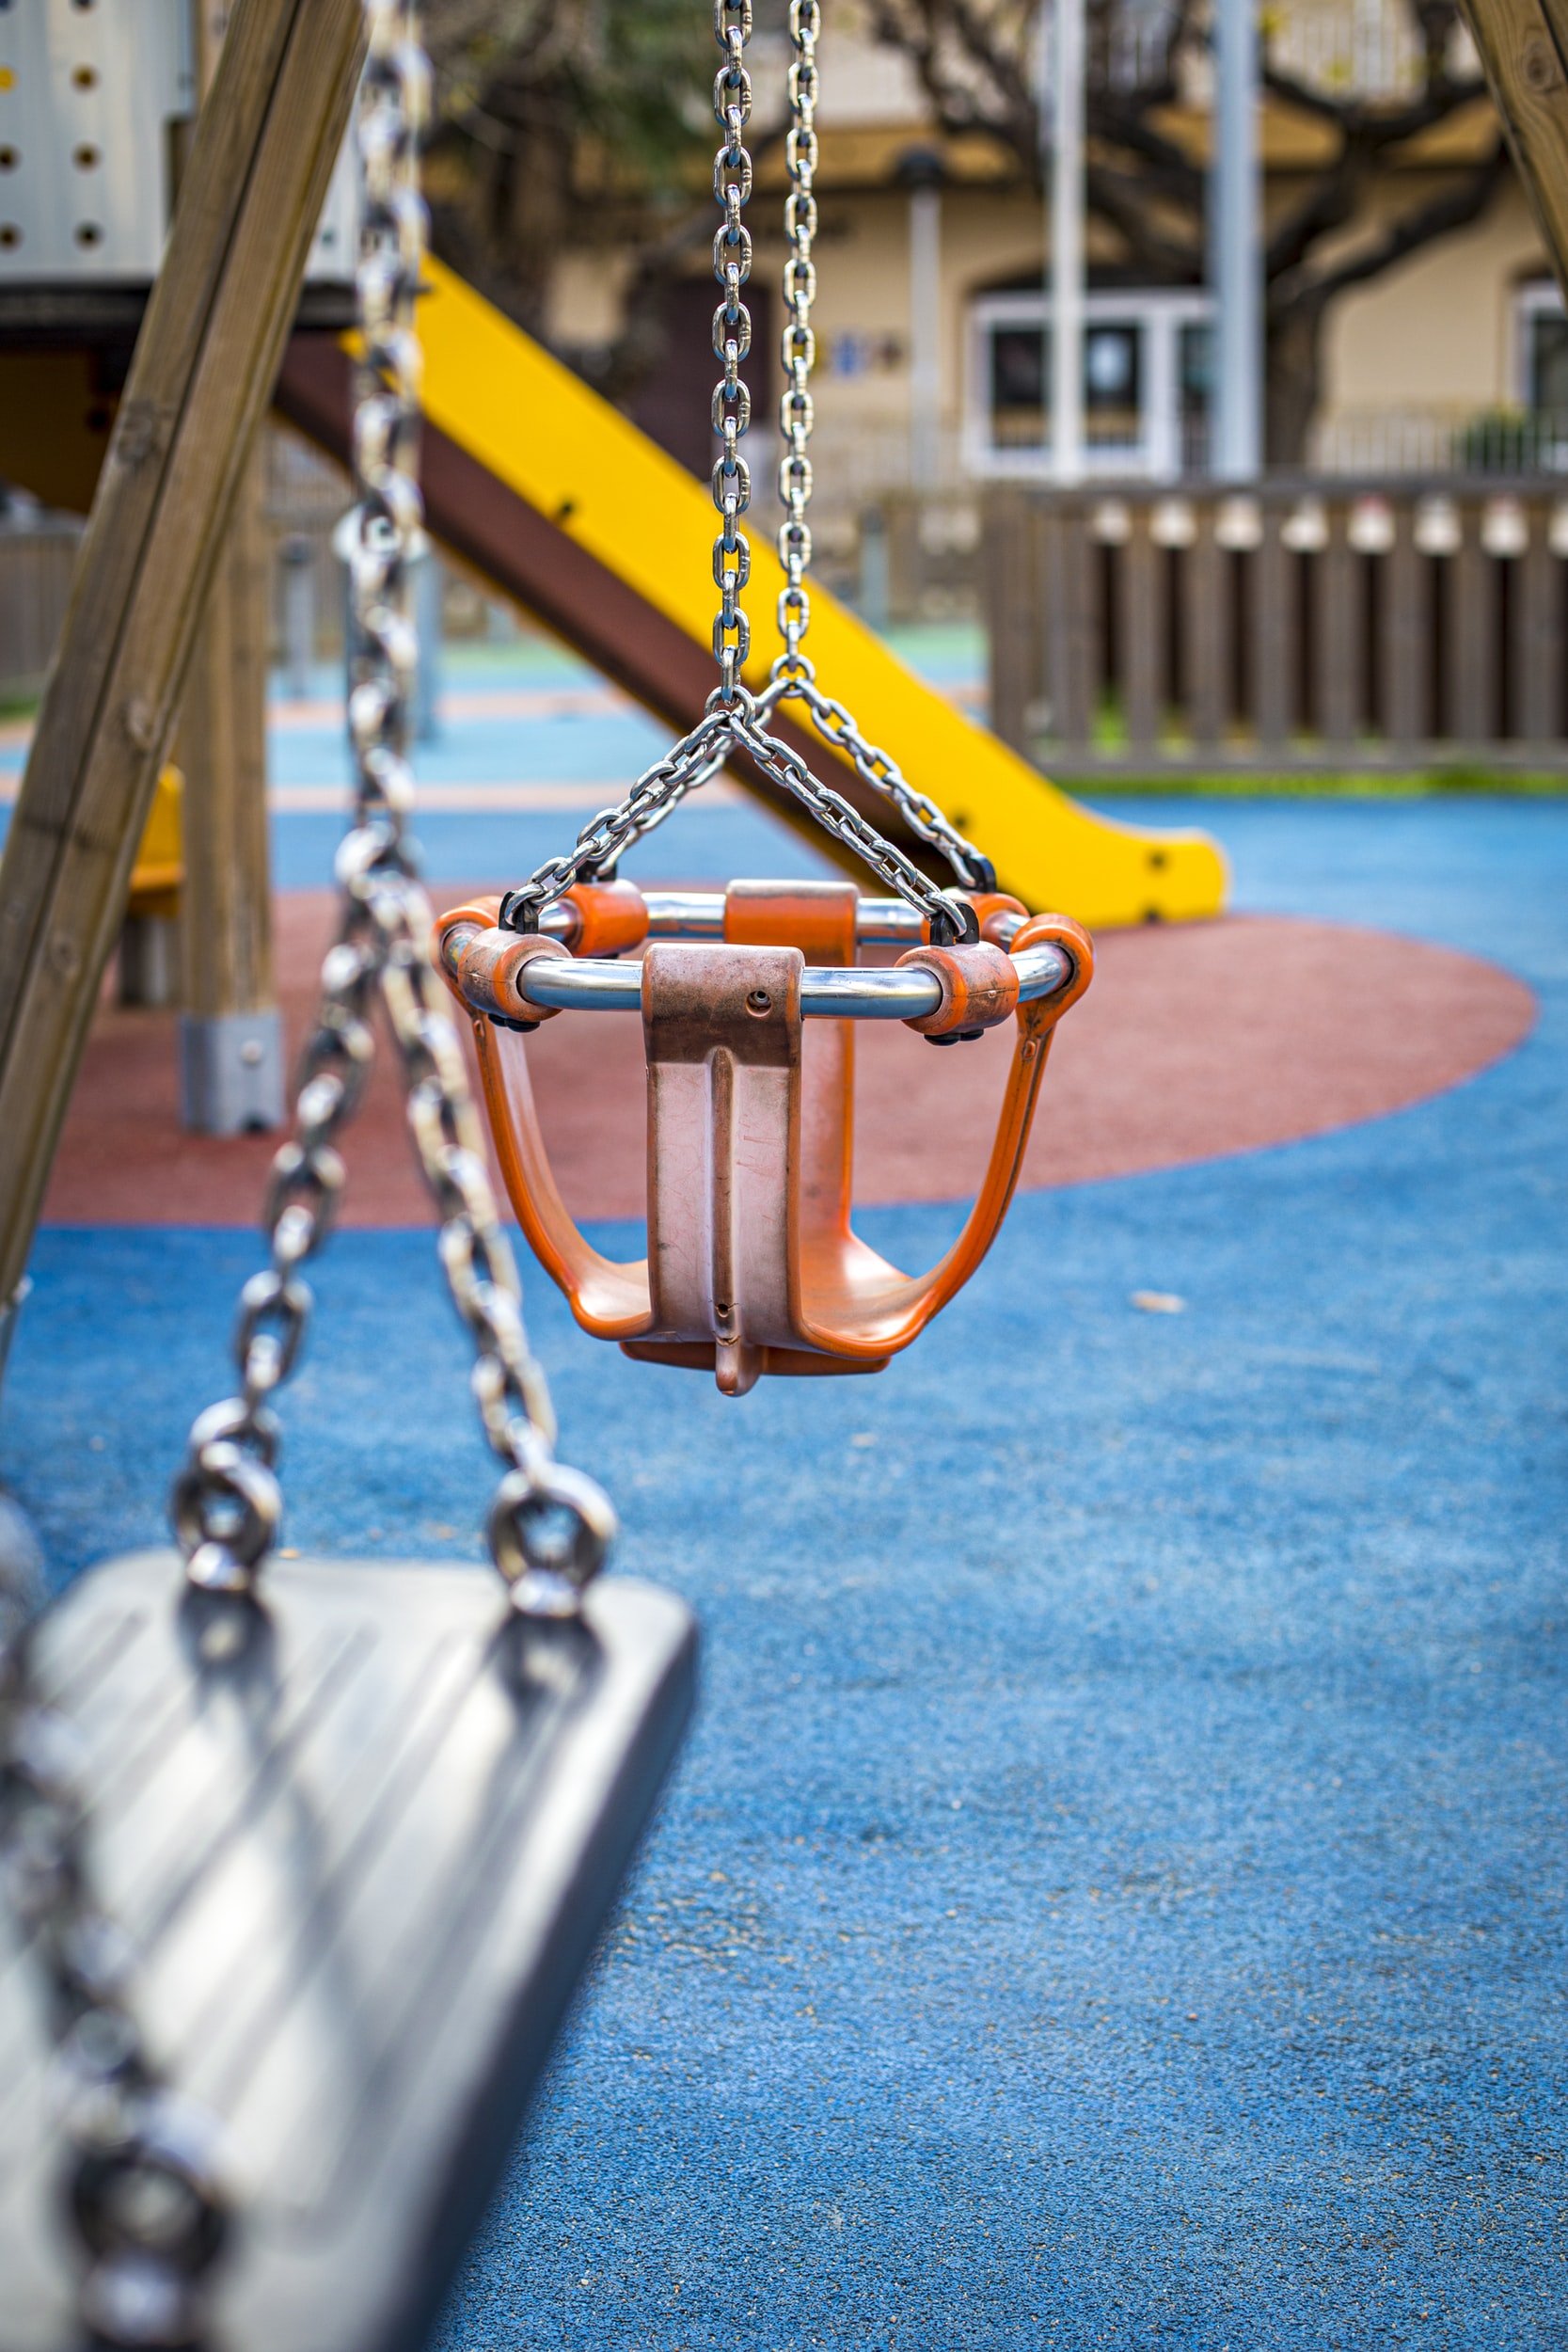 outdoor childcare centre swing set